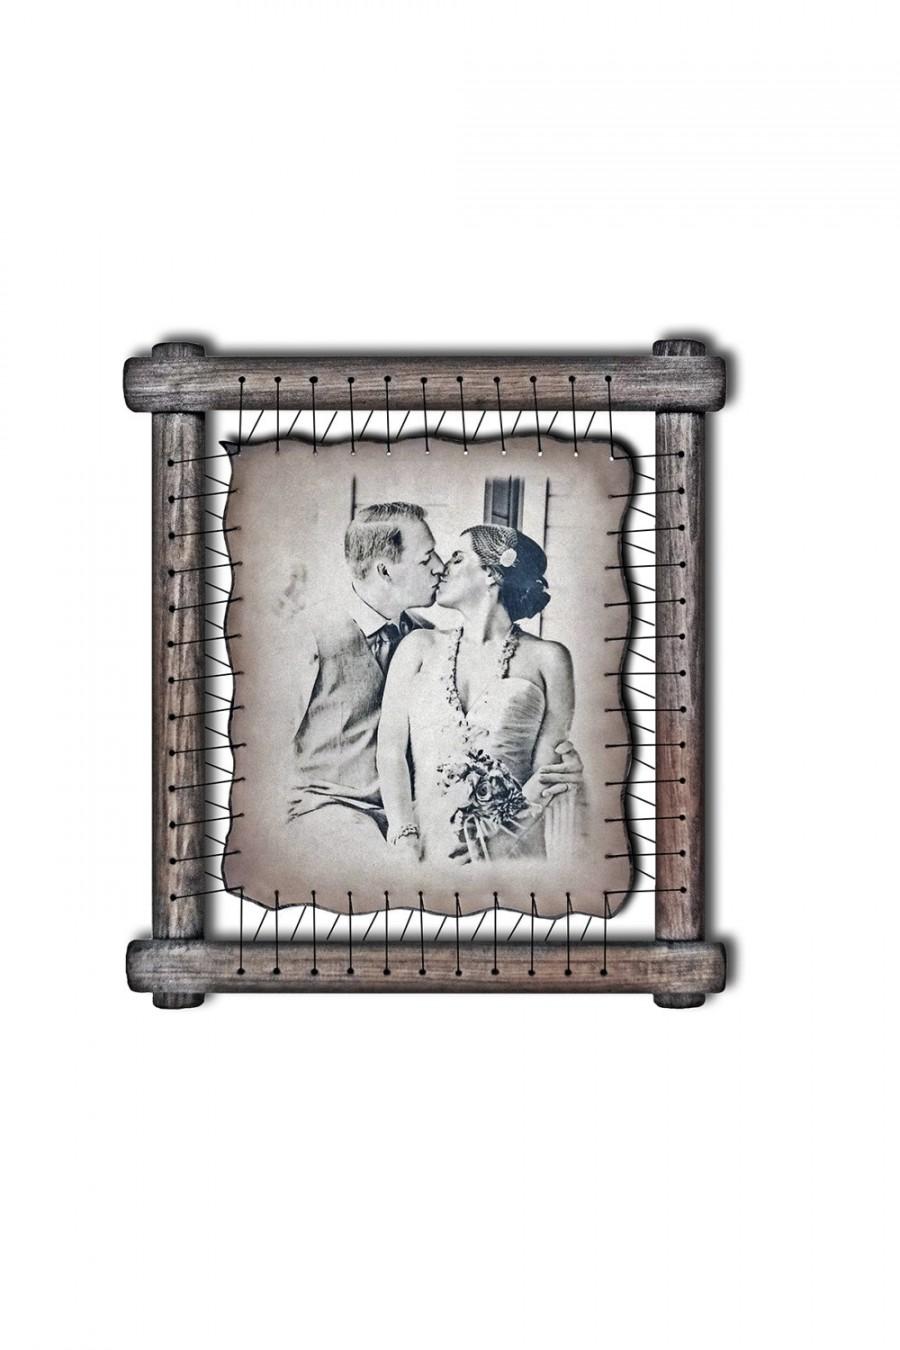 Hochzeit - Wedding Anniversary Gifts For Husband Leather Personalised Portrait From Photo 3rd Wedding Anniversary Greetings For Wife Presents For Her